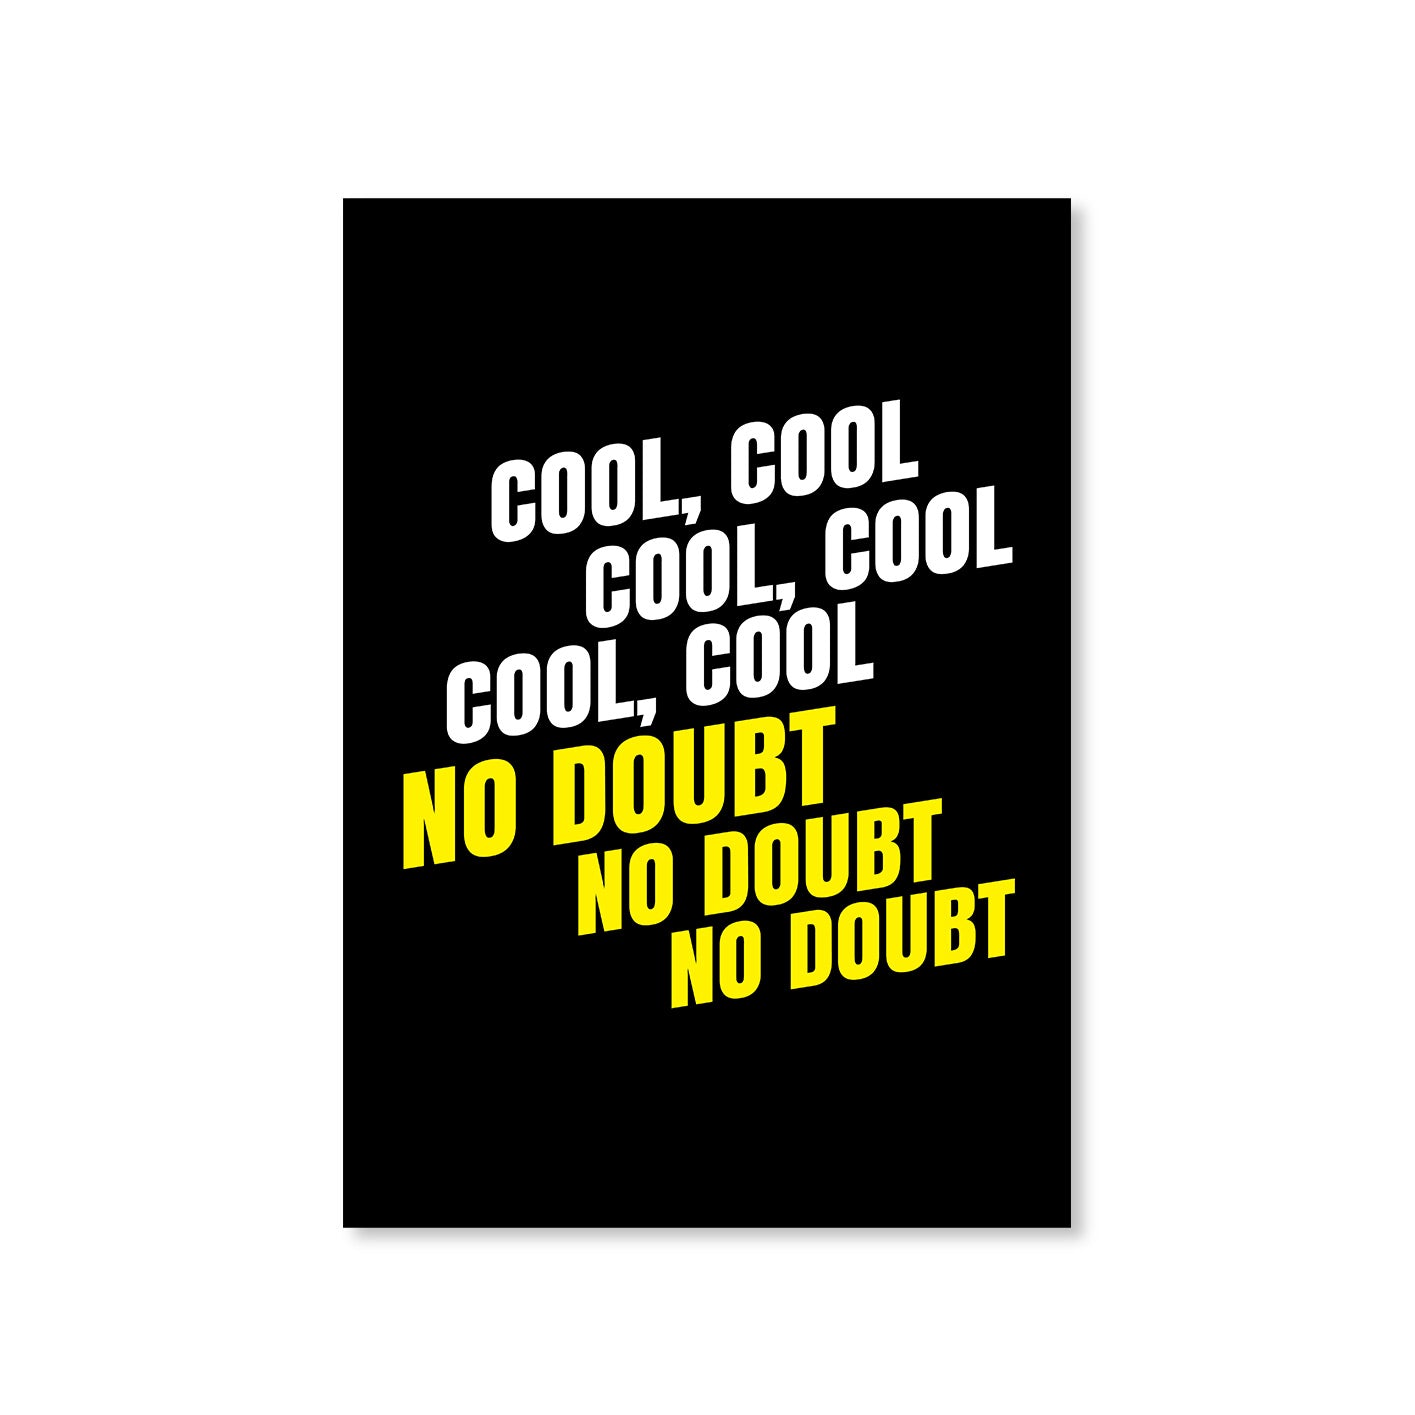 brooklyn nine-nine cool cool cool no doubt no doubt no doubt poster wall art buy online india the banyan tee tbt a4 detective jake peralta terry charles boyle gina linetti andy samberg merchandise clothing acceessories